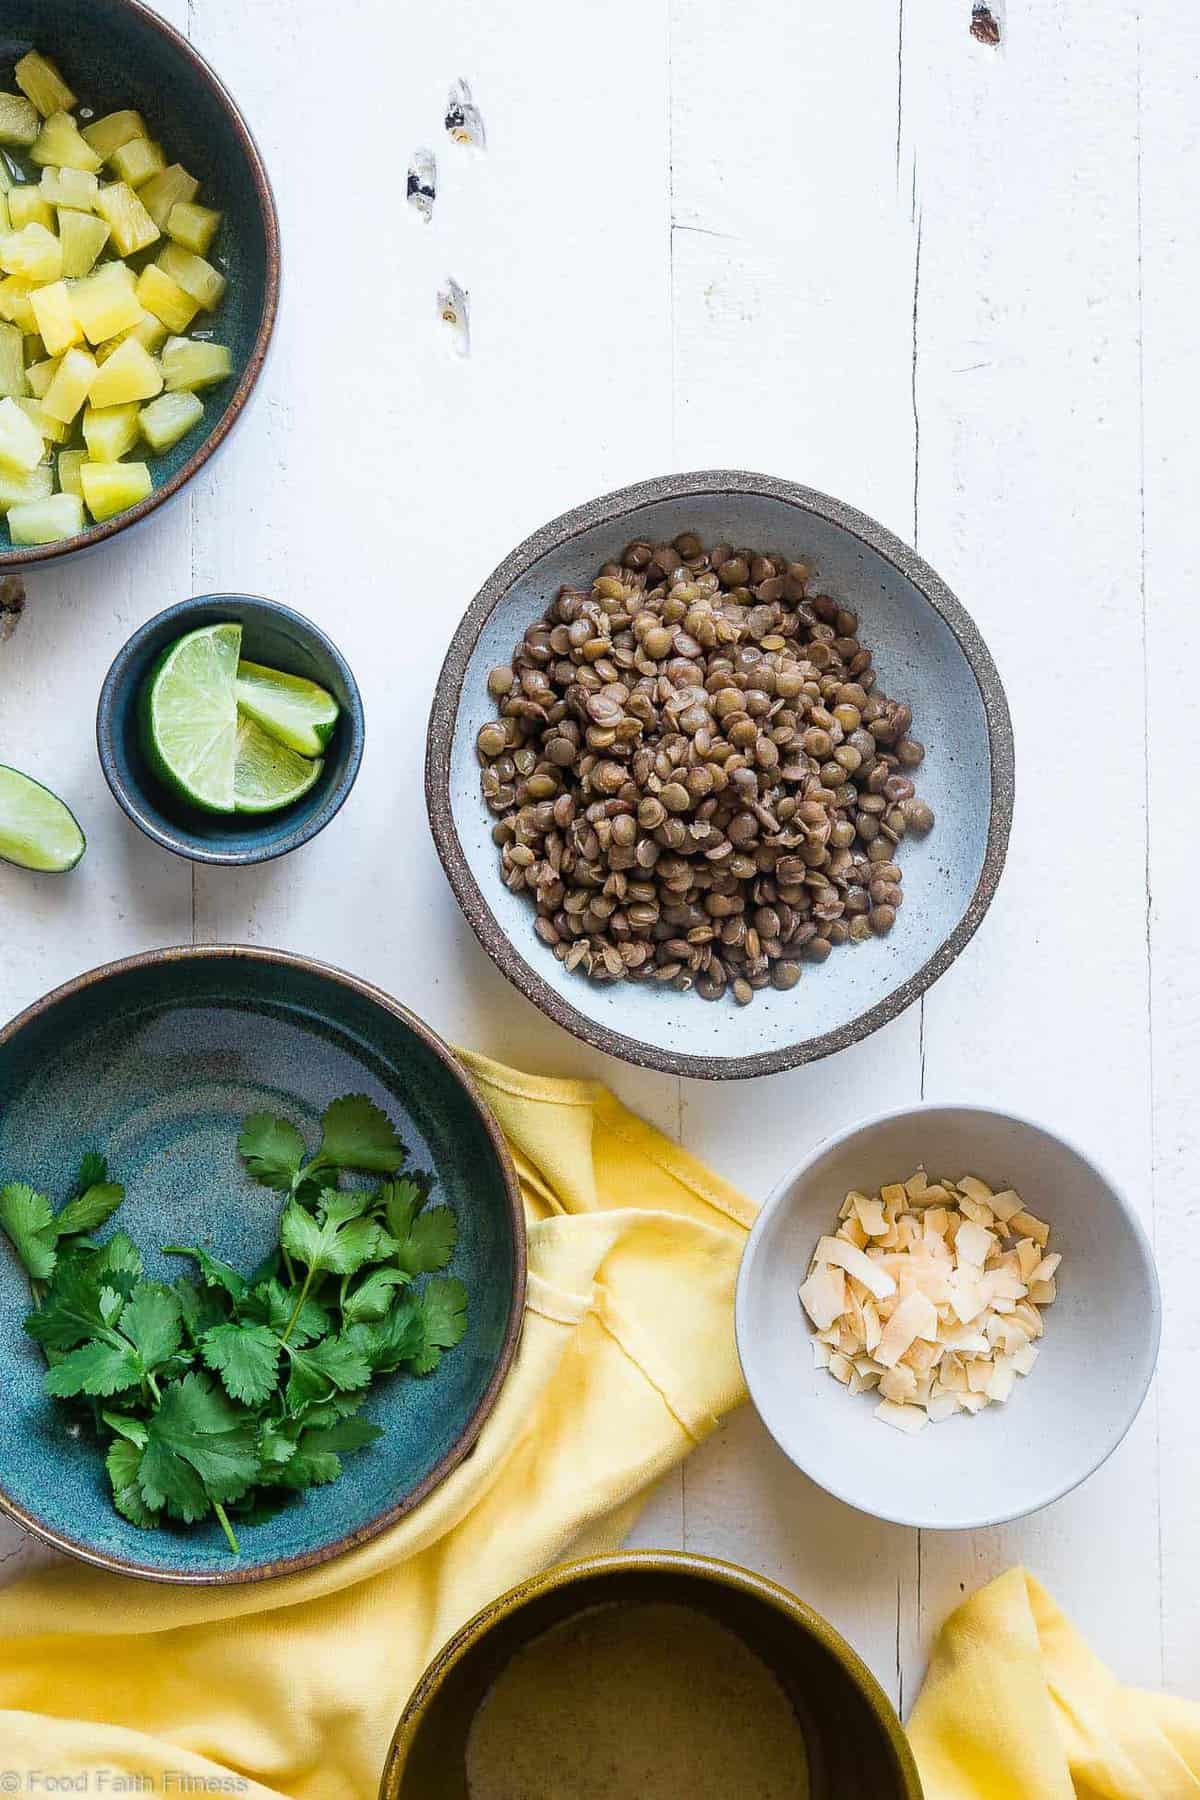 Caribbean Lentil Salad - This easy, healthy cold lentil salad recipe has a Caribbean-inspired, tropical twist! It's a vegan-friendly, gluten free meal that's packed with plant-based protein! Make-ahead friendly and great for meal prep! | #Foodfaithfitness | #Vegan #Healthy #Plantbased #Salad #Healthy